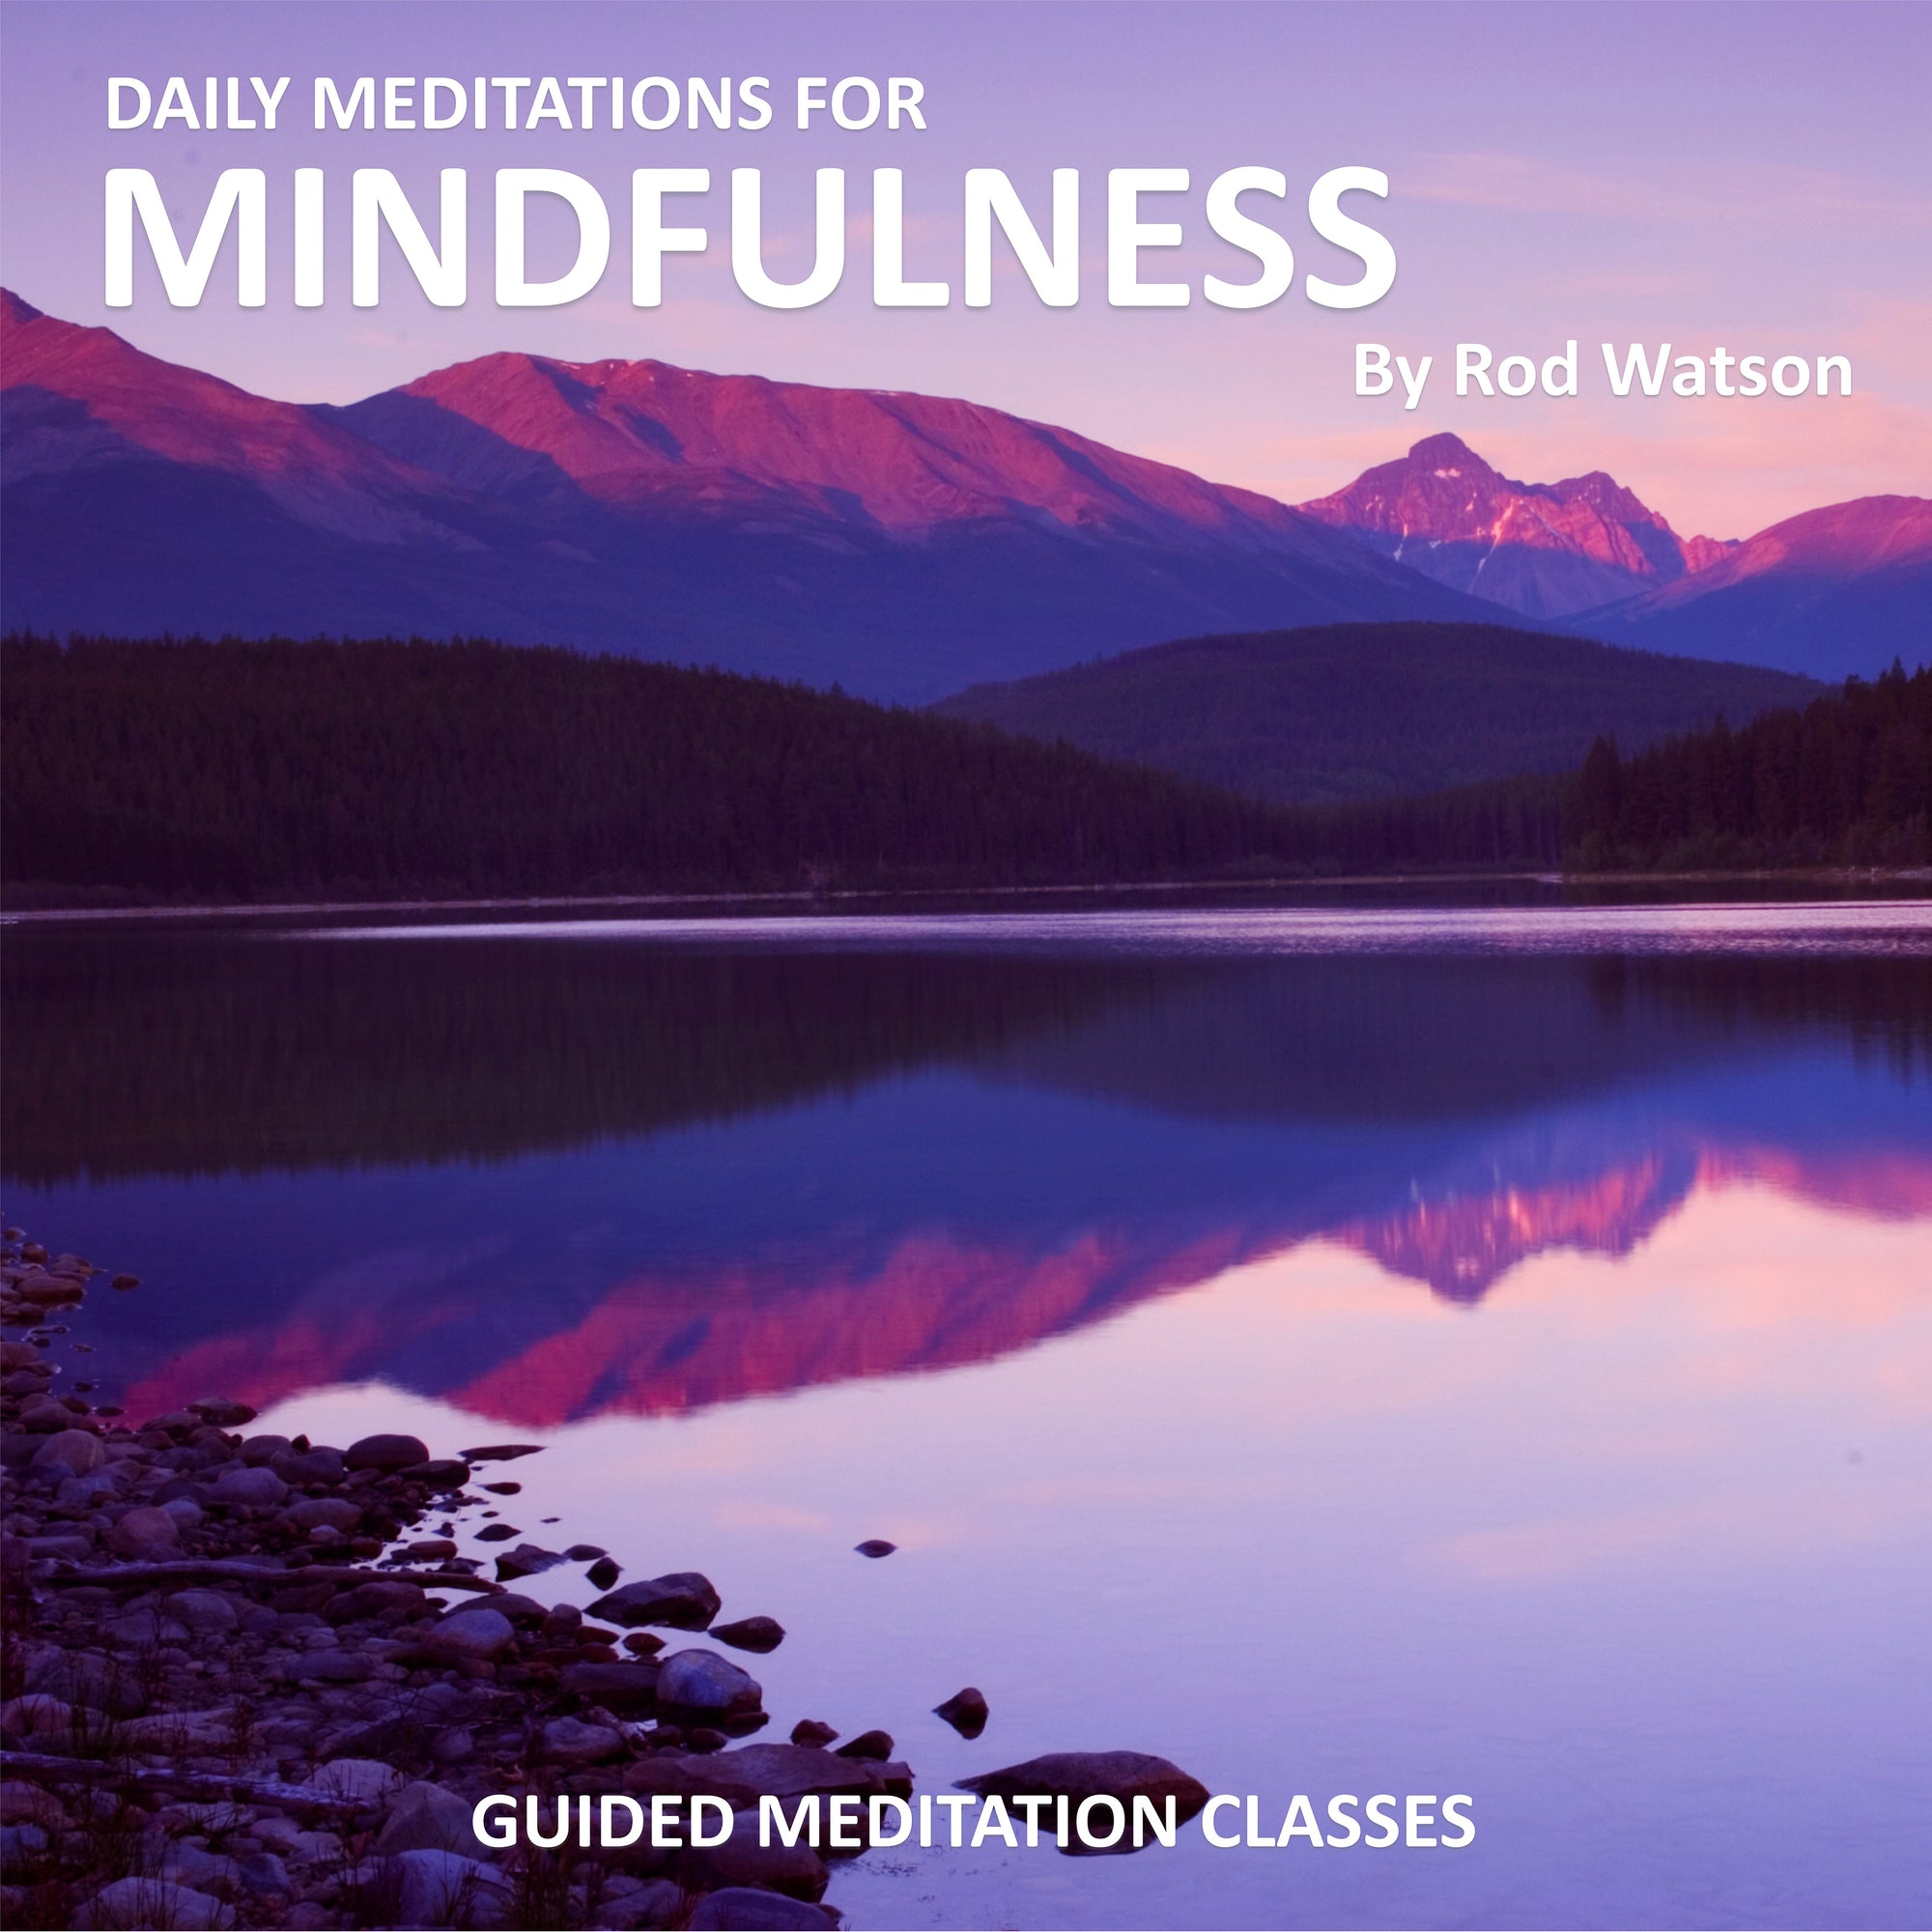 Daily Meditations for Mindfulness